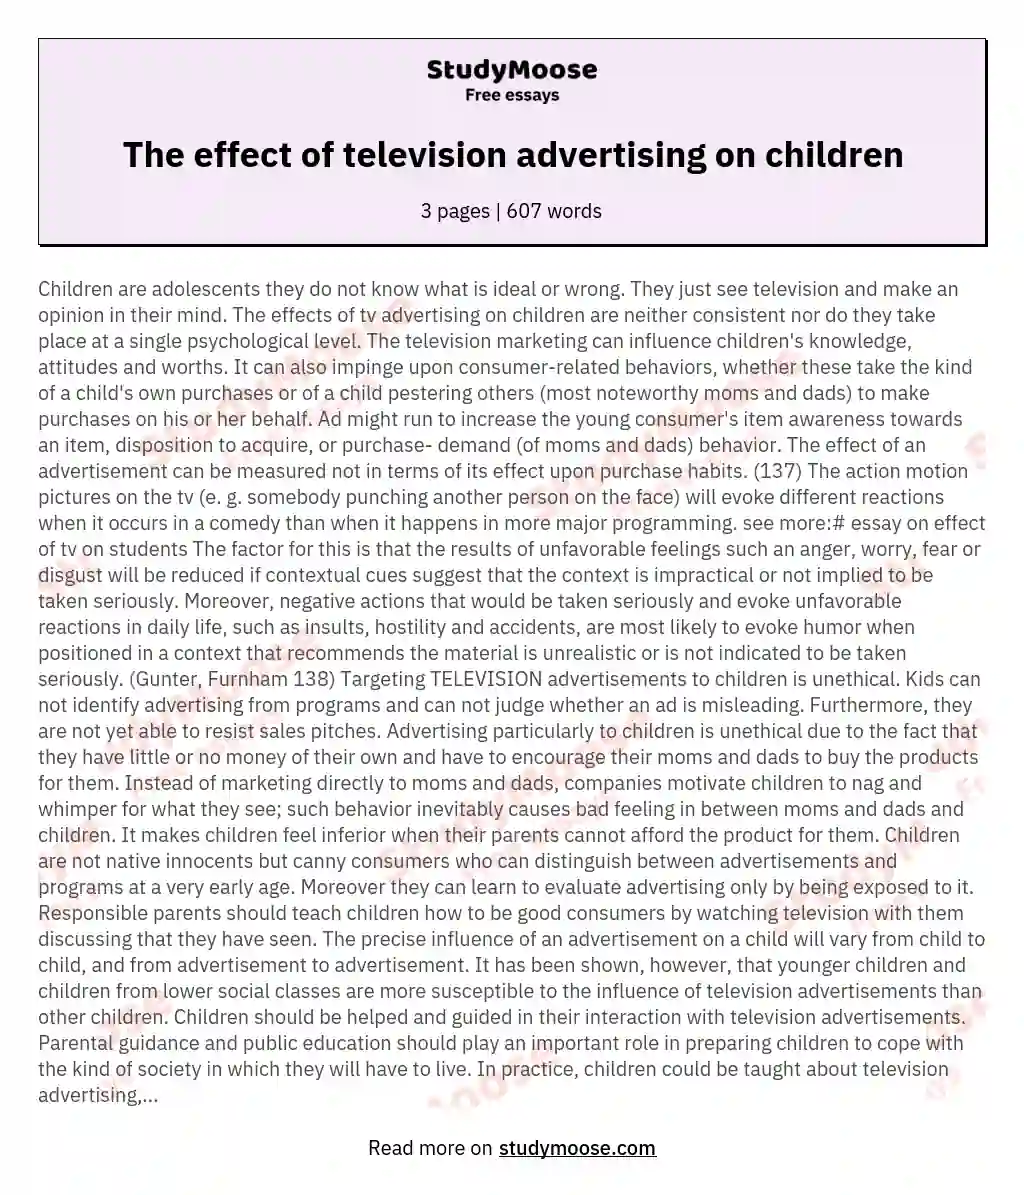 The effect of television advertising on children